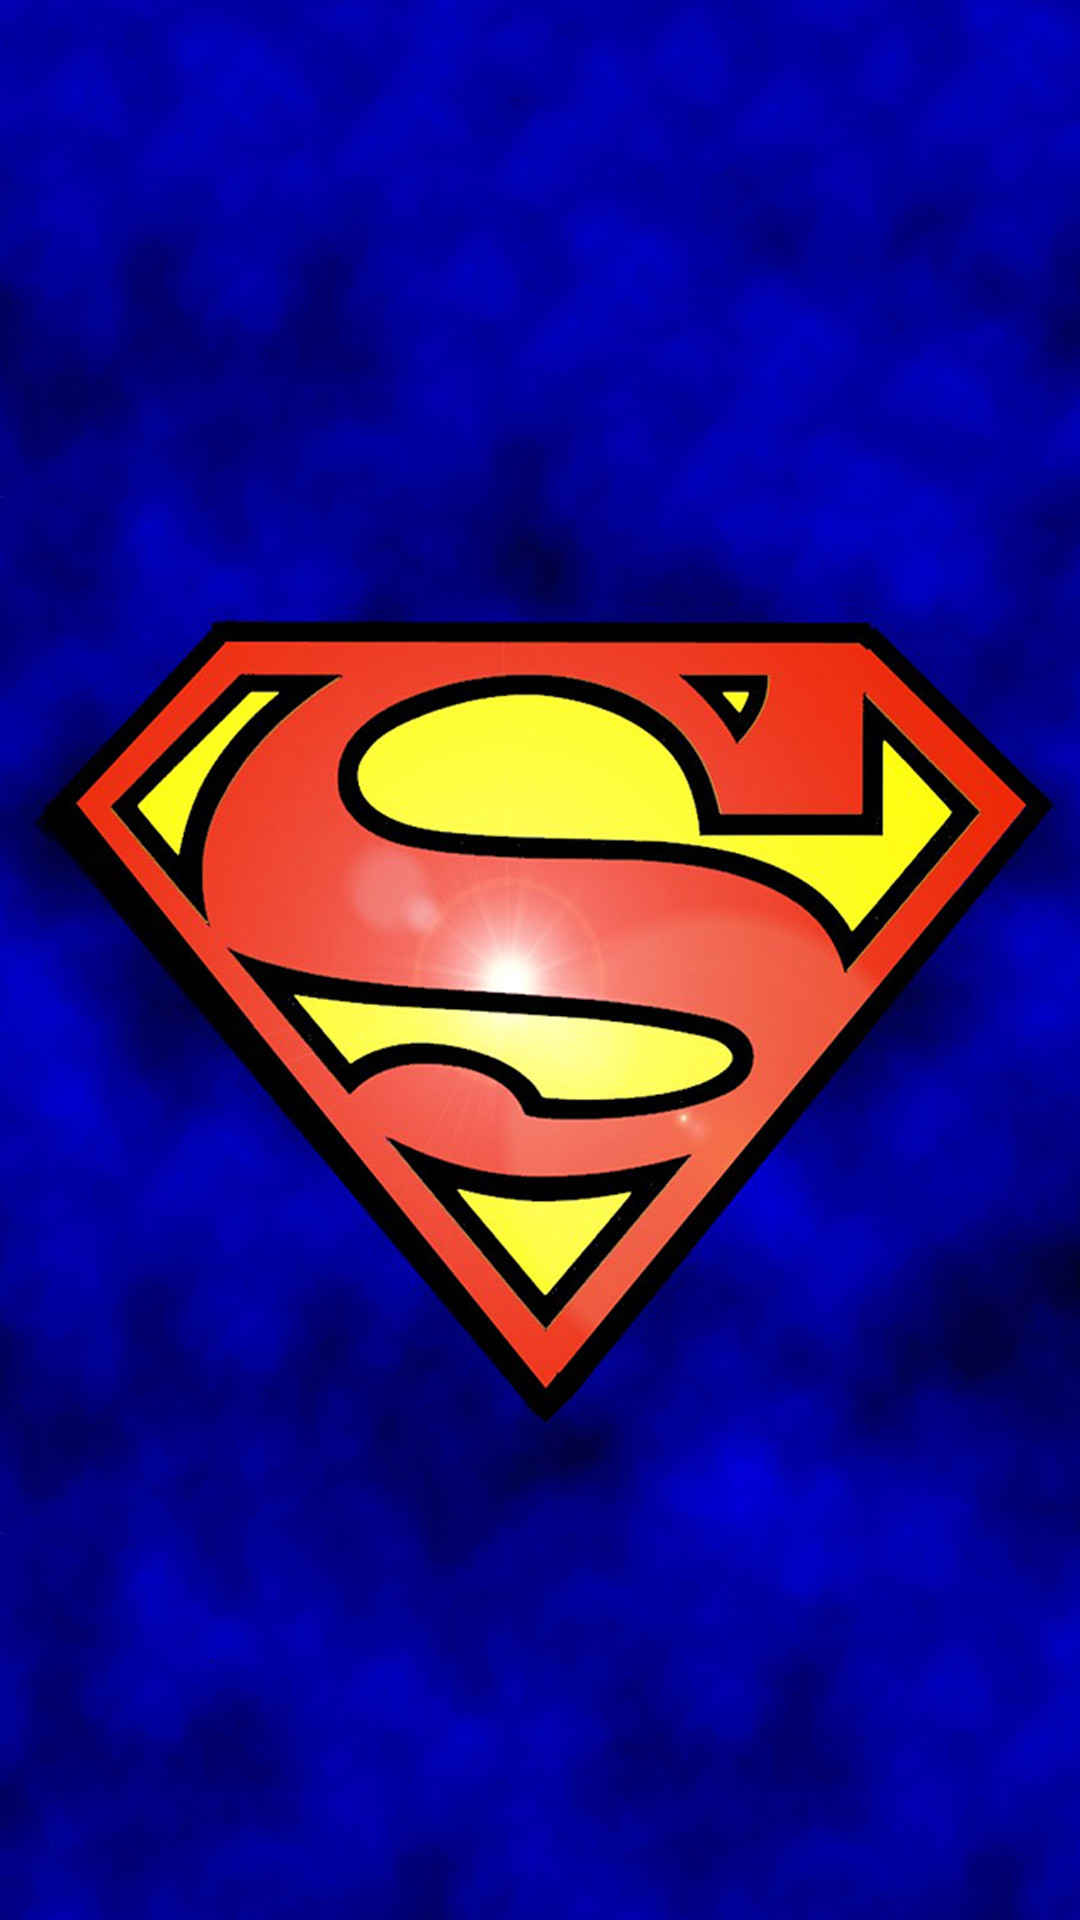 1080x1920 Funny Superman Logo iPhone 6 Wallpaper Download | iPhone Wallpapers .